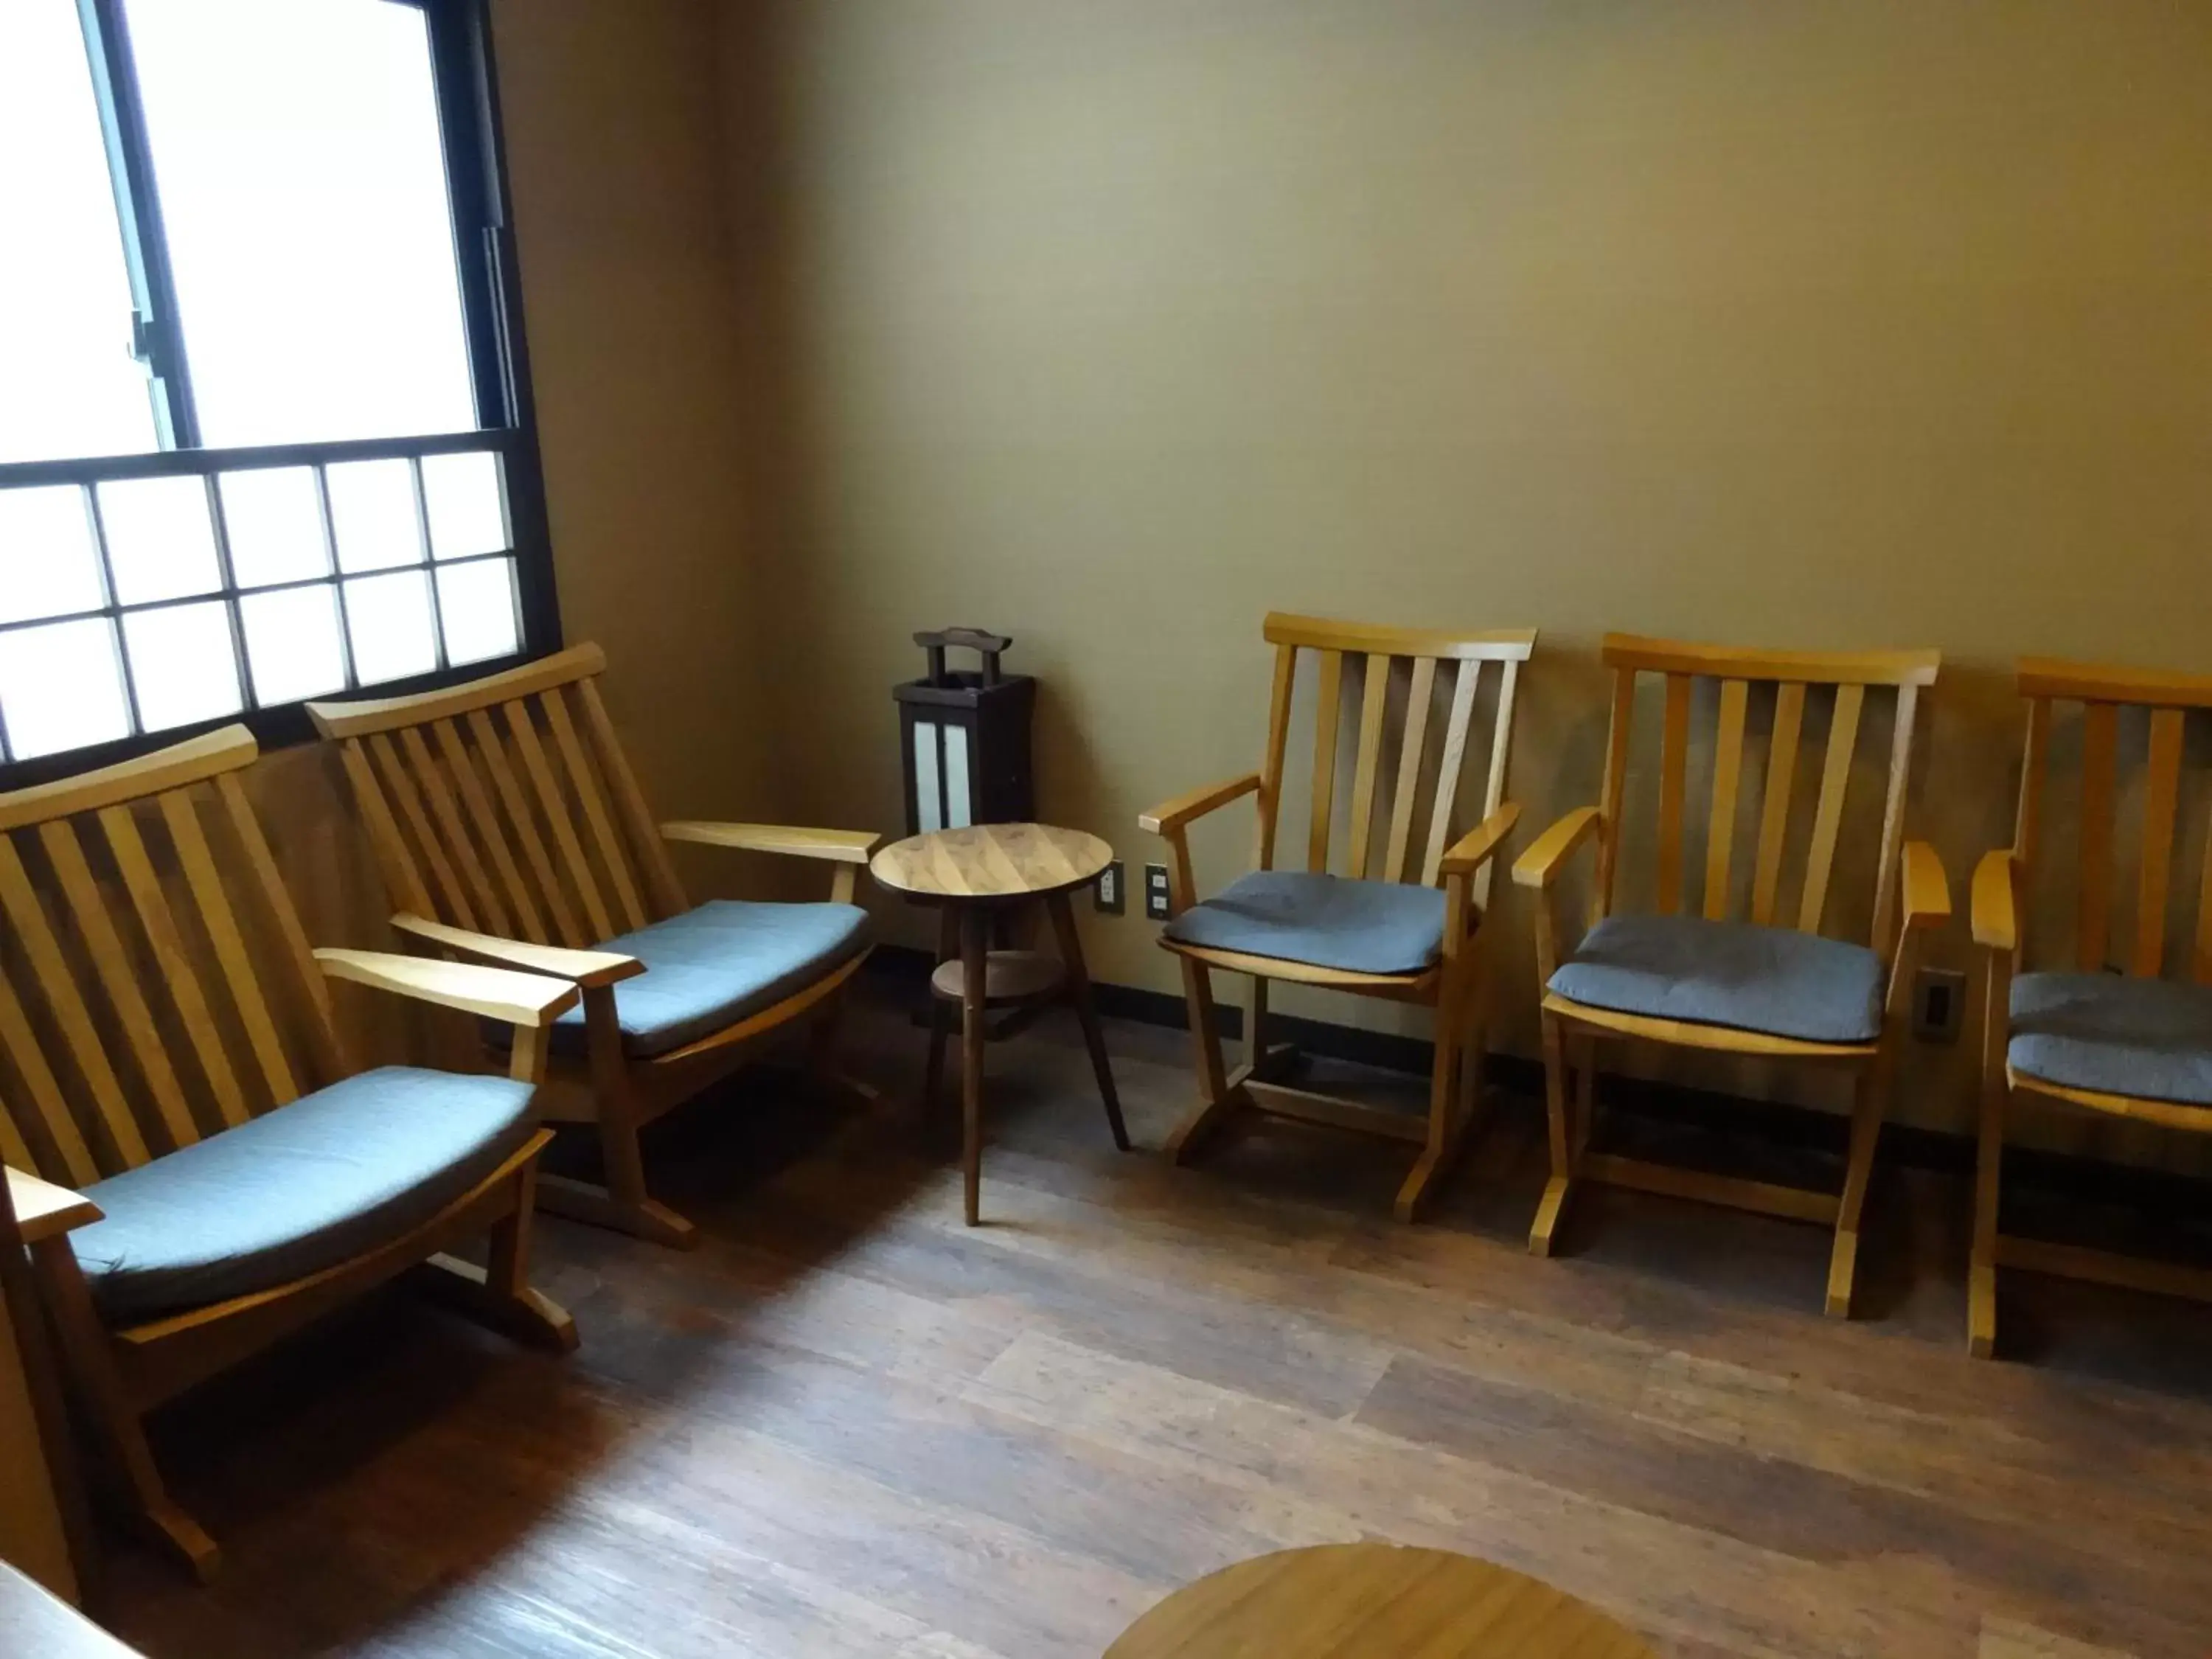 Other, Seating Area in Dormy Inn Hakata Gion